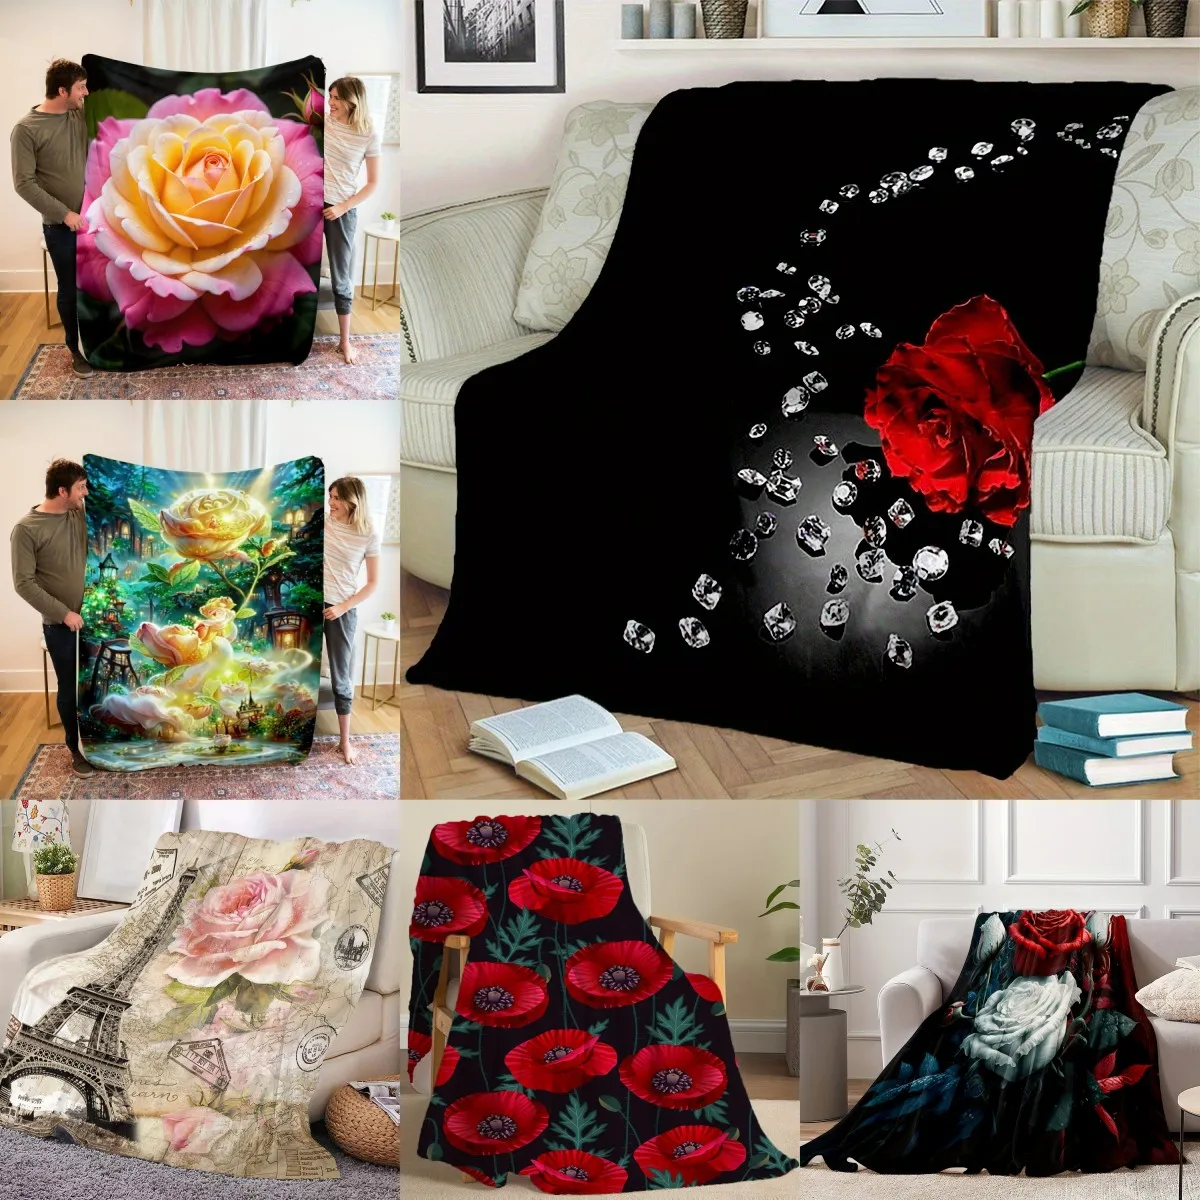 

1pc Throw Blanket Crystal Roses Are Given As Birthday Gifts Or Holiday Gifts To Your Loved Ones Nap Blankets Are Comfortable